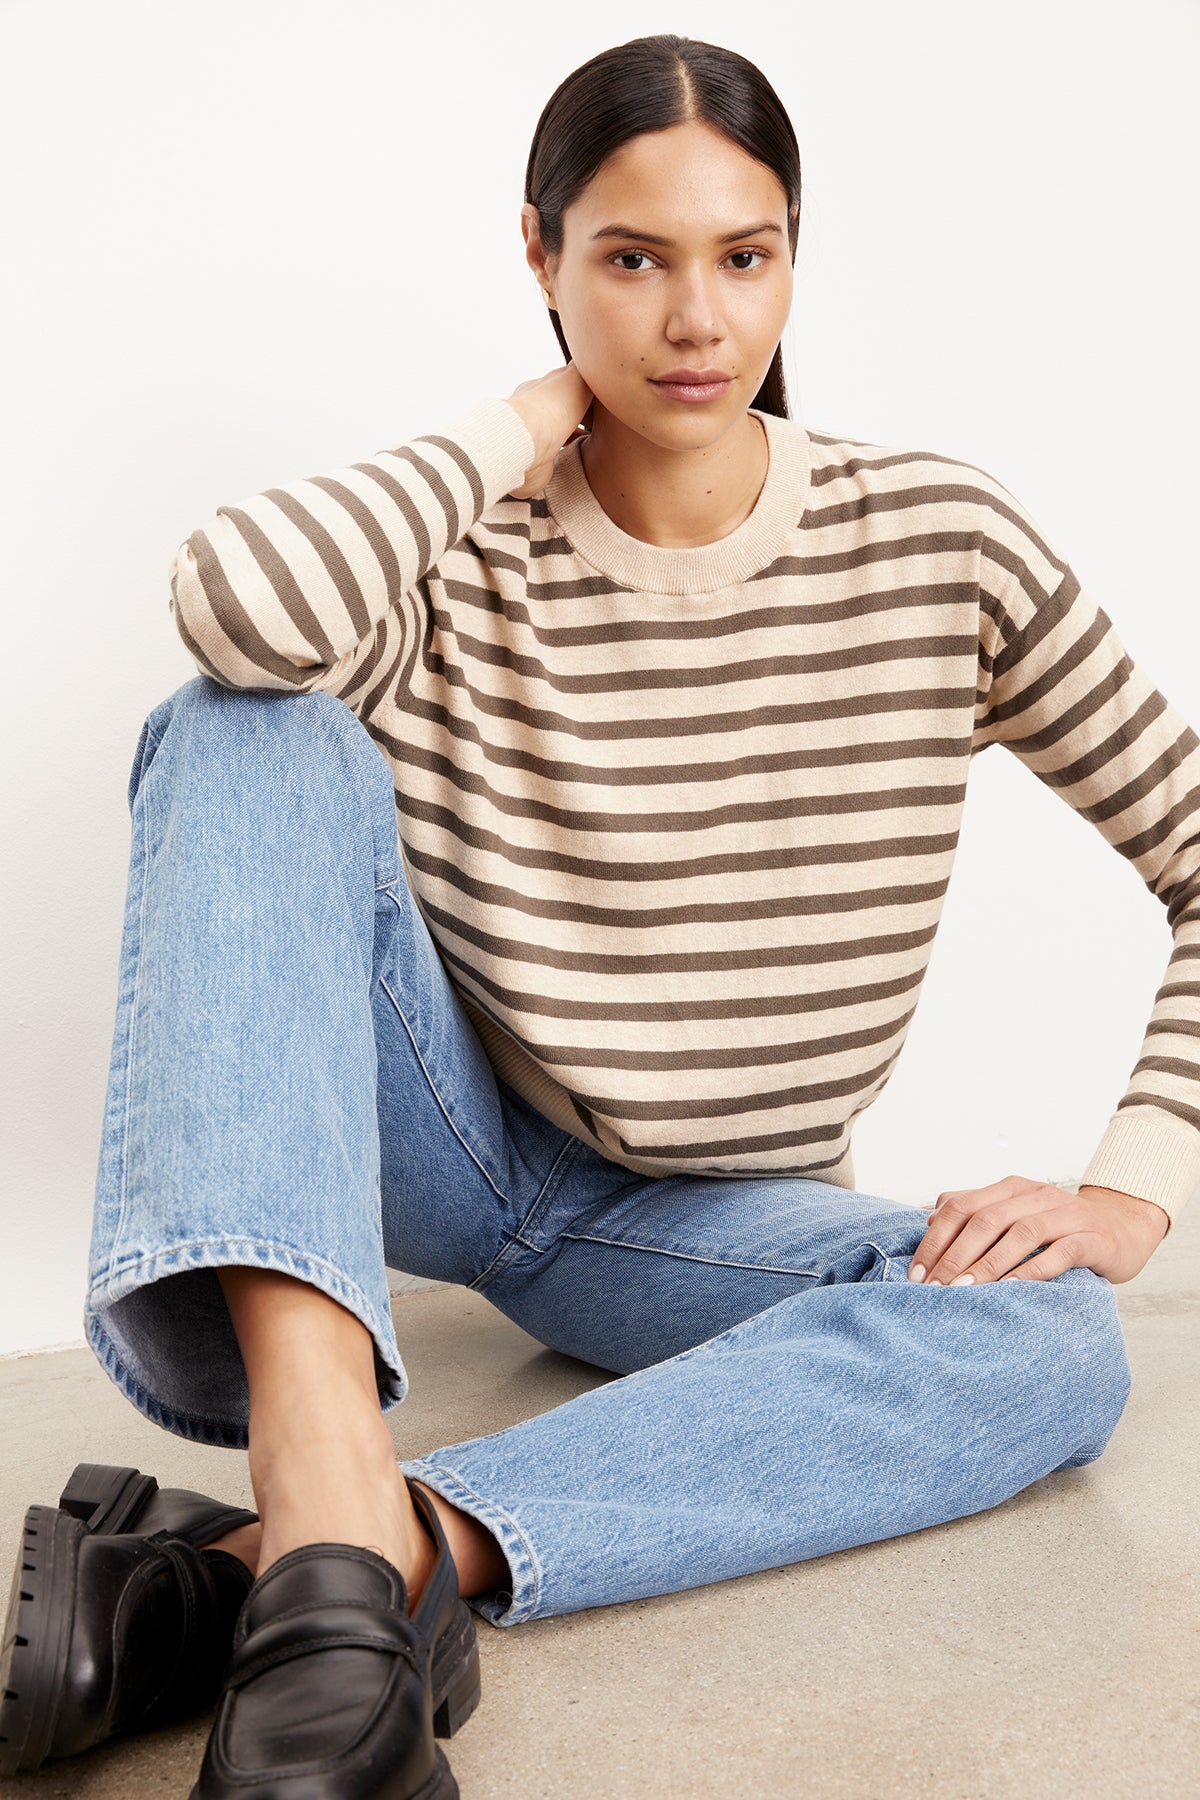 The model is wearing a Velvet by Graham & Spencer ALISTER STRIPED CREW NECK SWEATER and jeans.-26799863464129